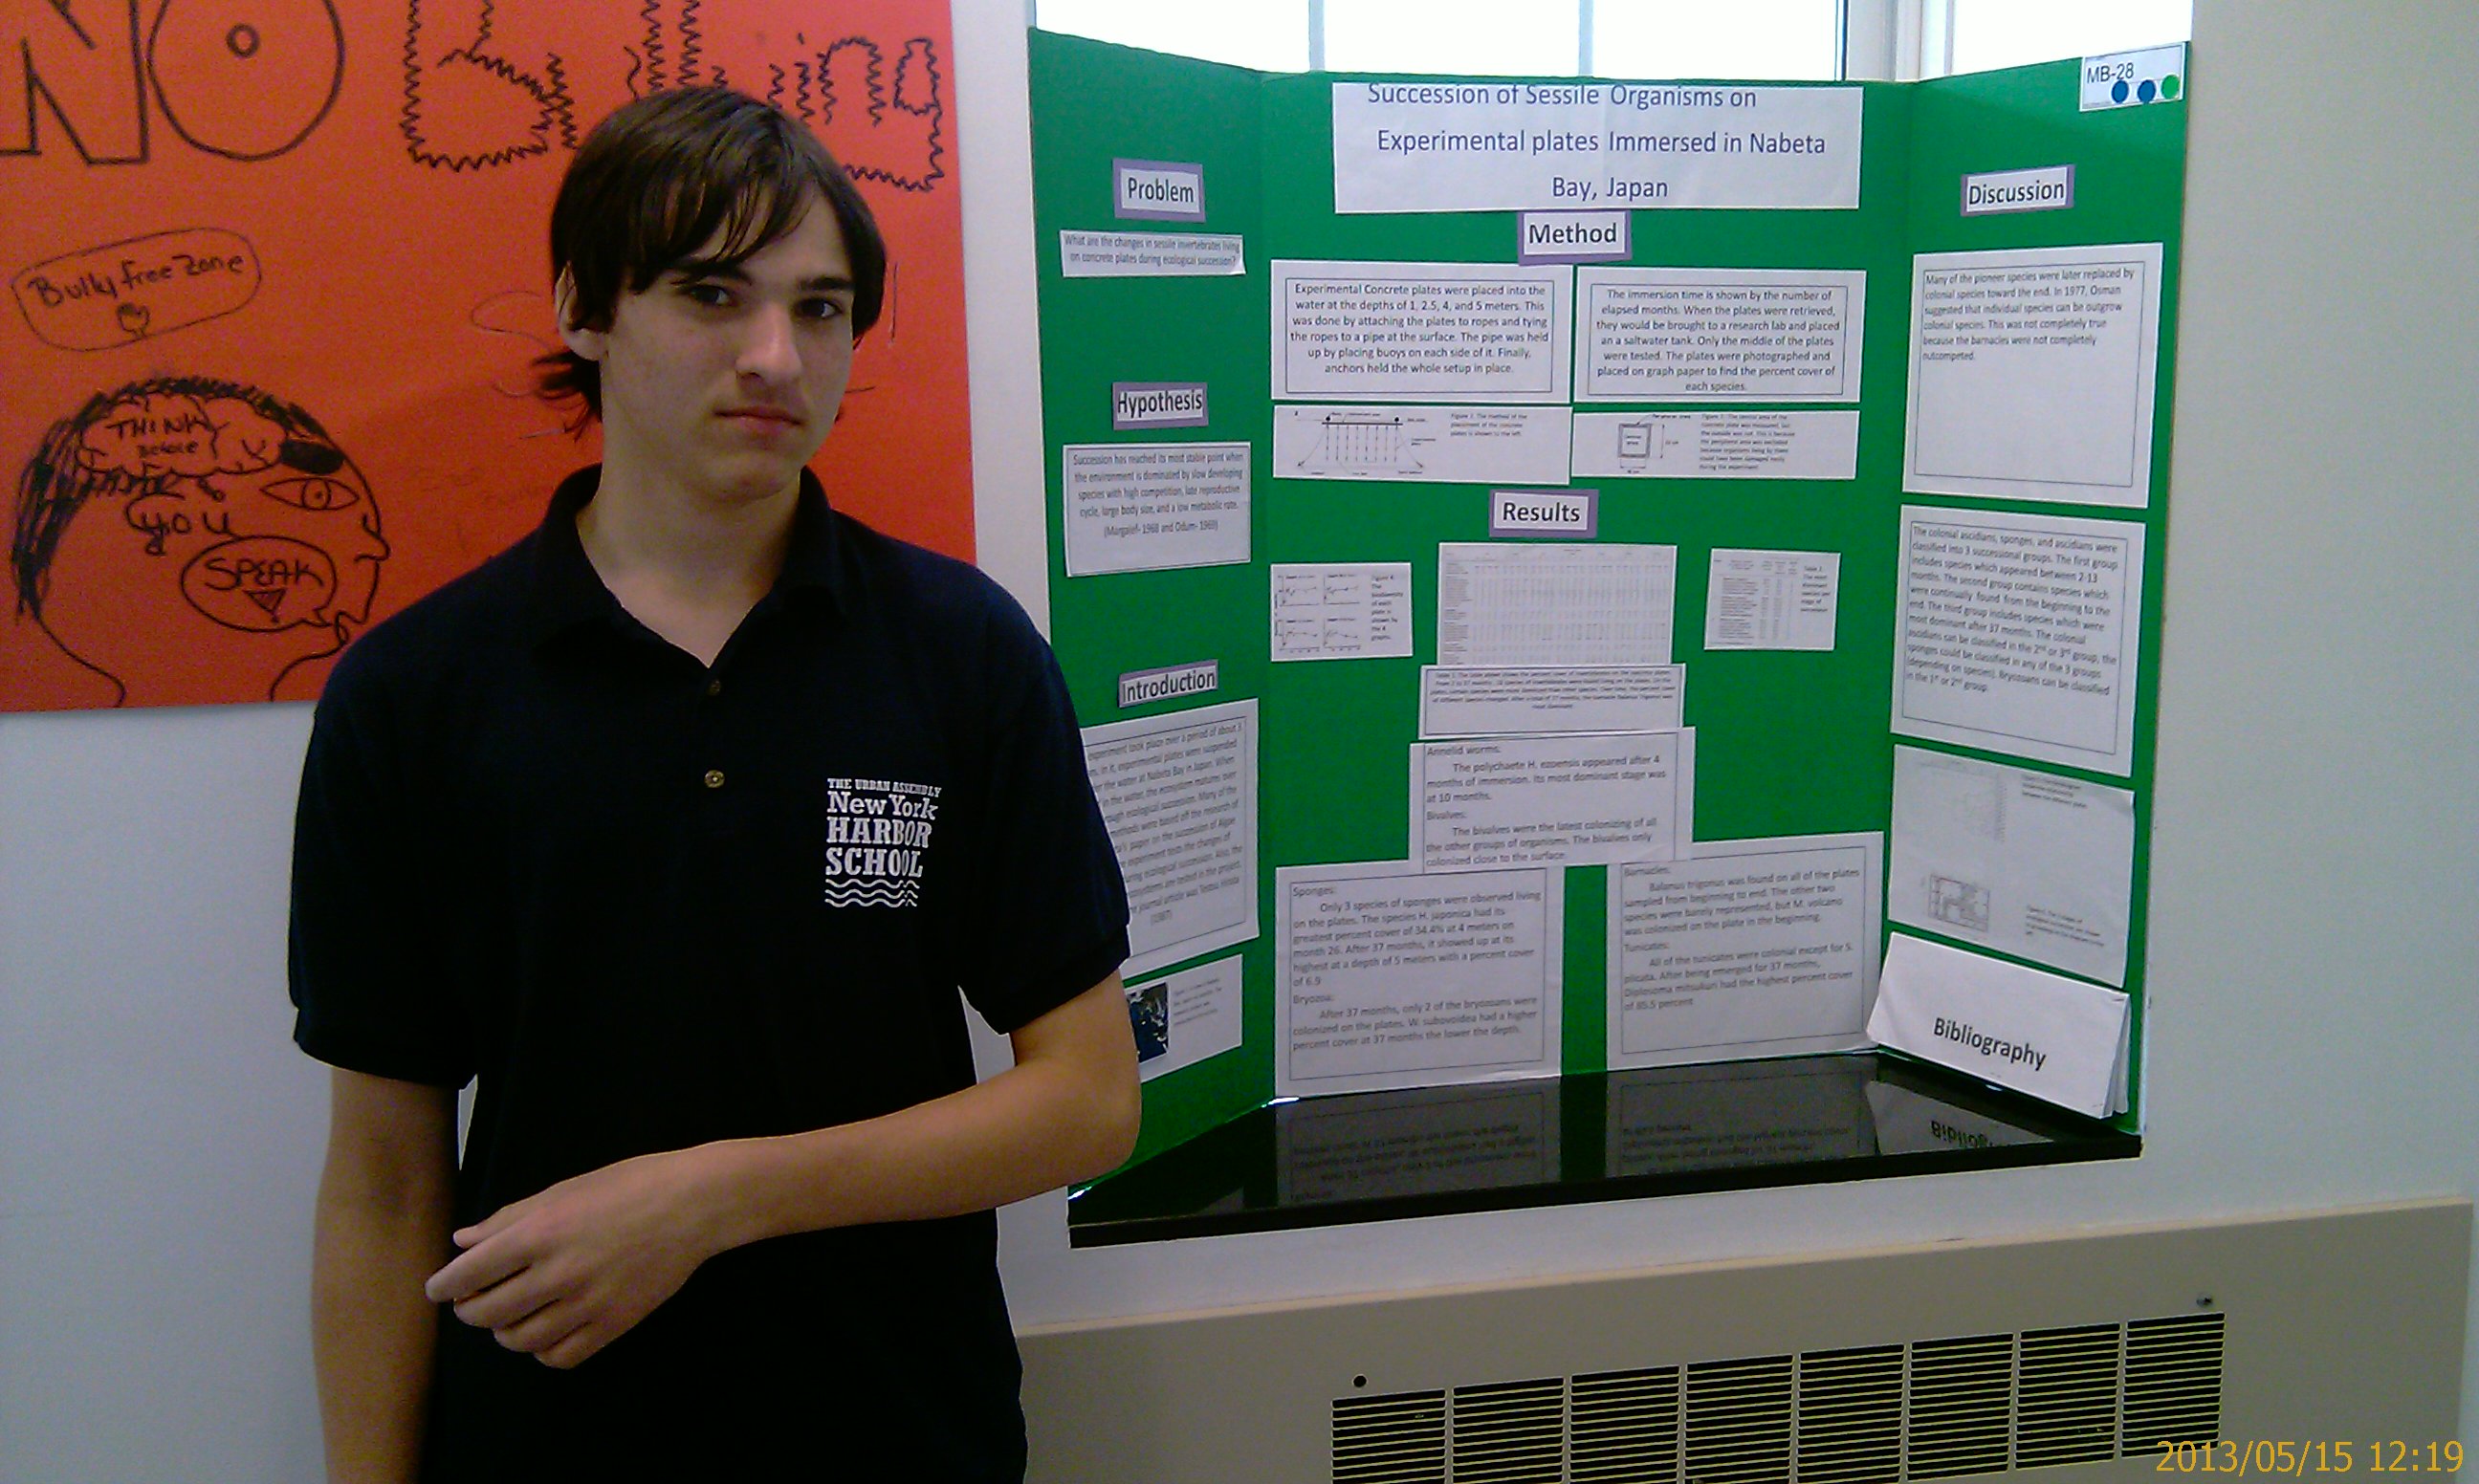 Andrew and his project on ecological succession